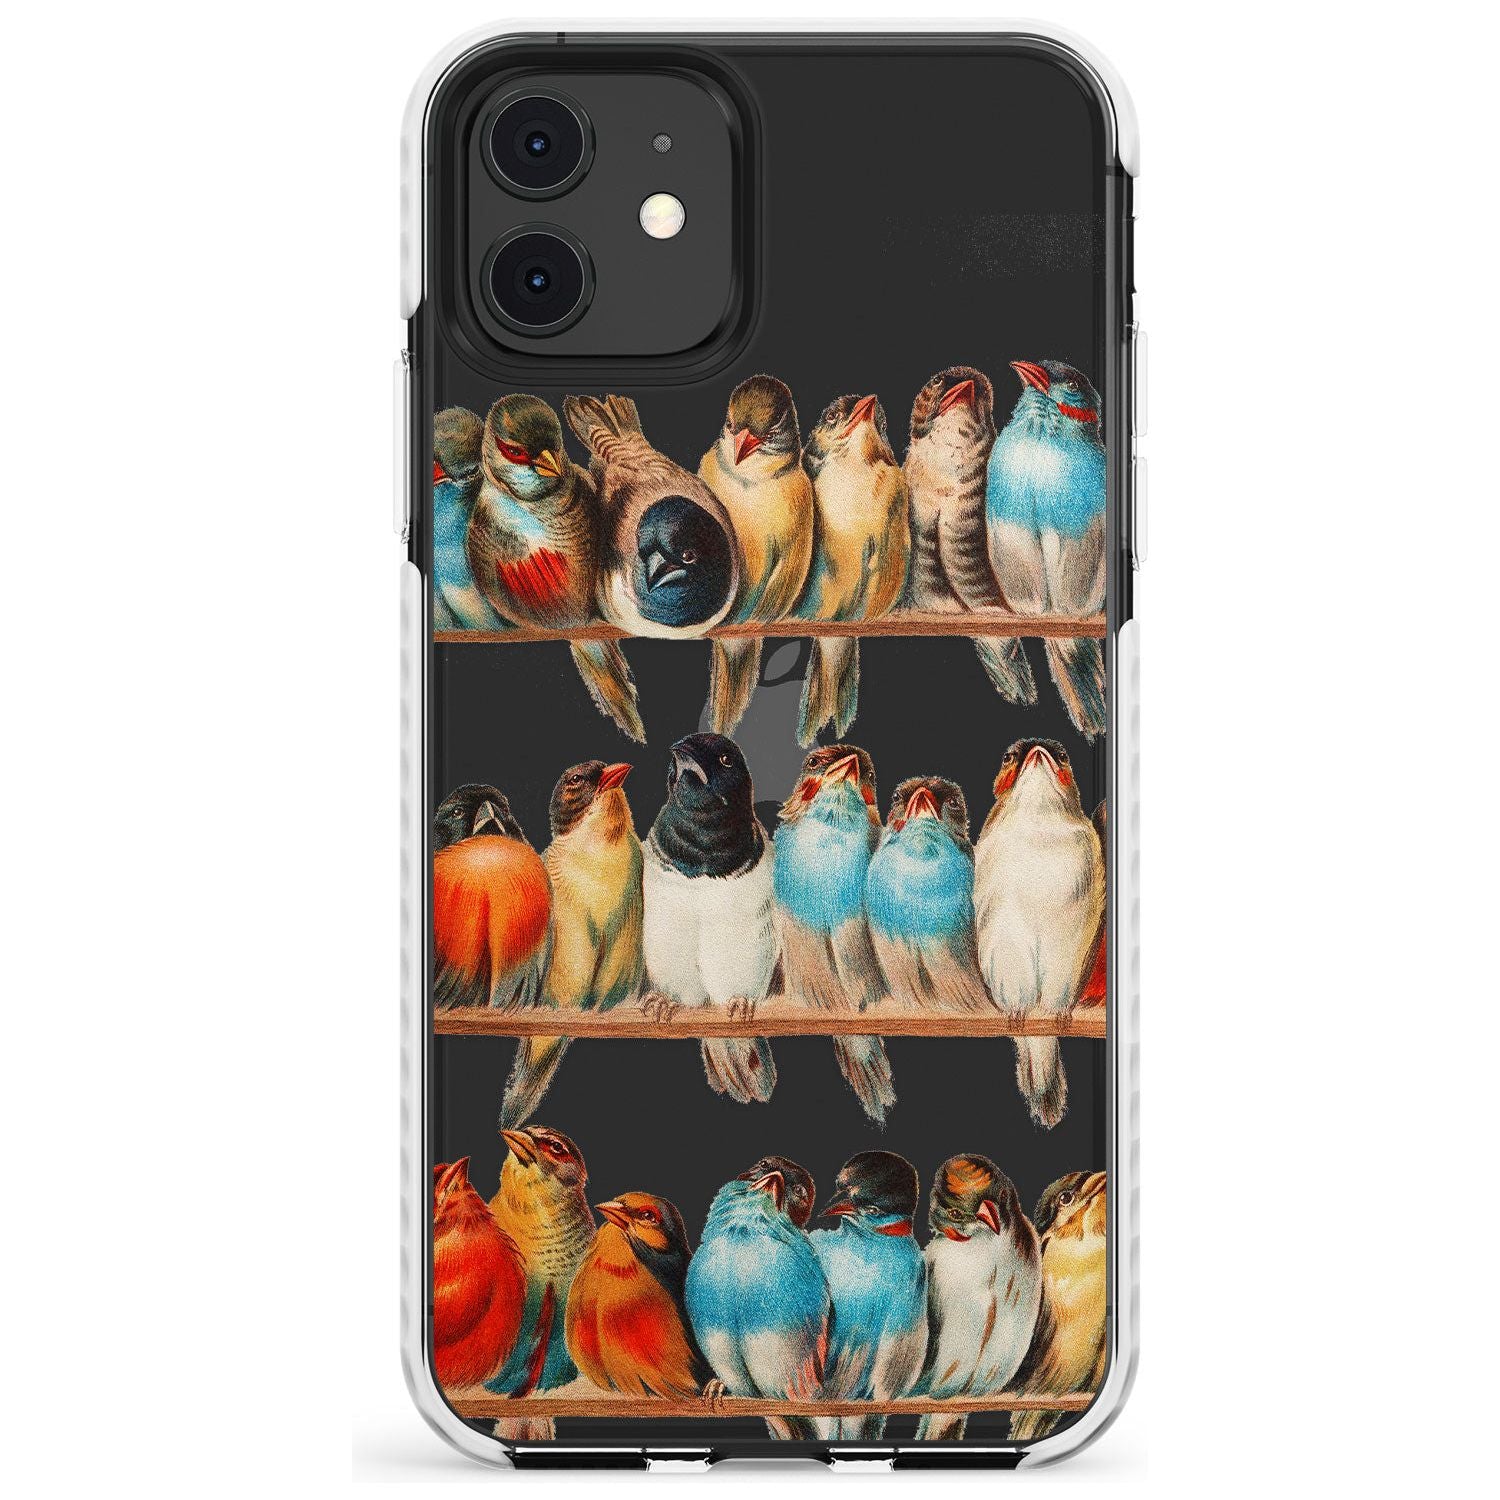 A Perch of Birds Impact Phone Case for iPhone 11